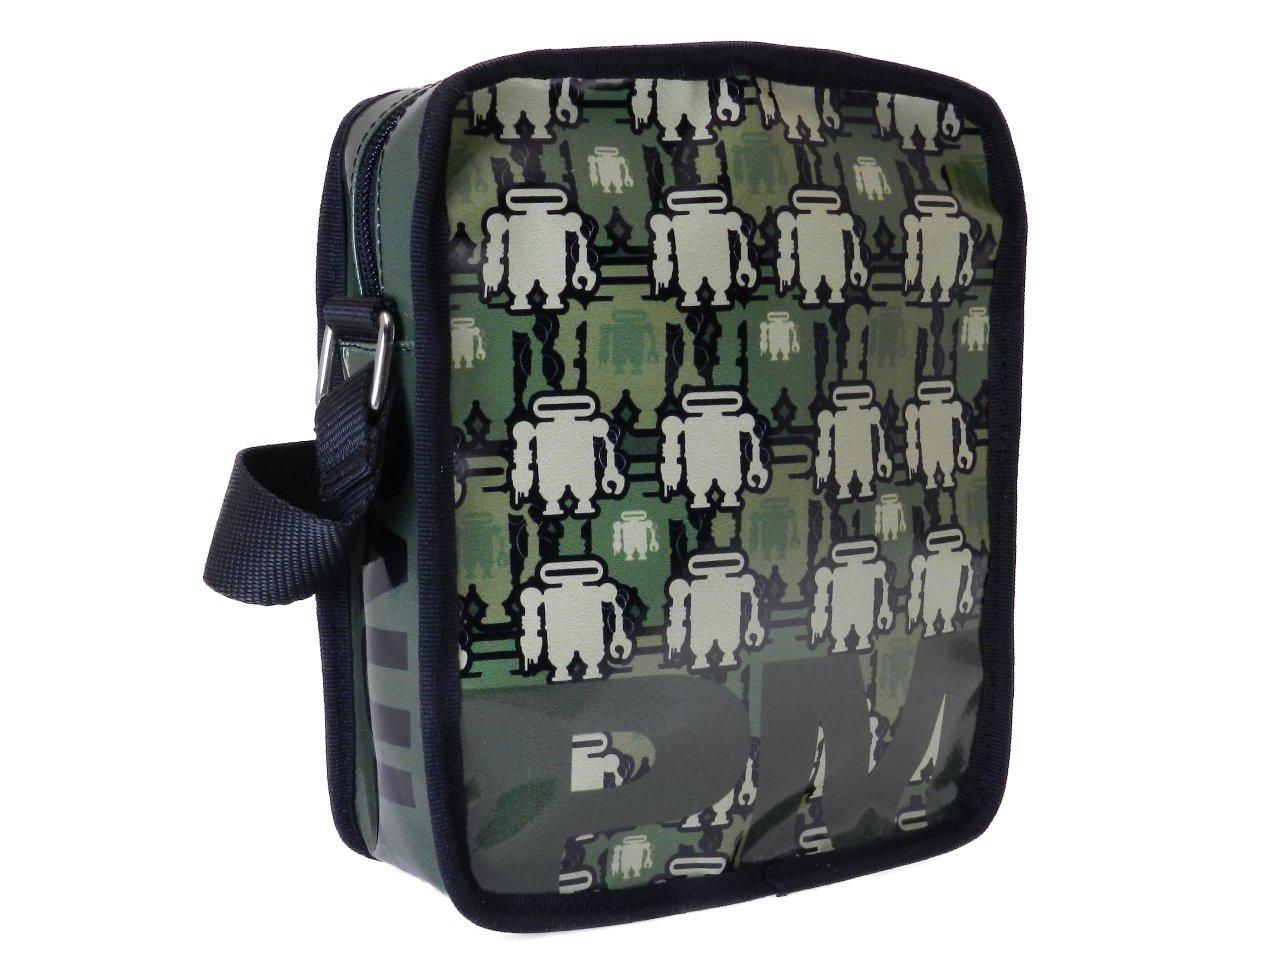 SHOULDER BAG DARK GREEN WITH PAUL MECCANICO'S ROBOTS. STRATOS MODEL MADE OF LORRY TARPAULIN. - Limited Edition Paul Meccanico